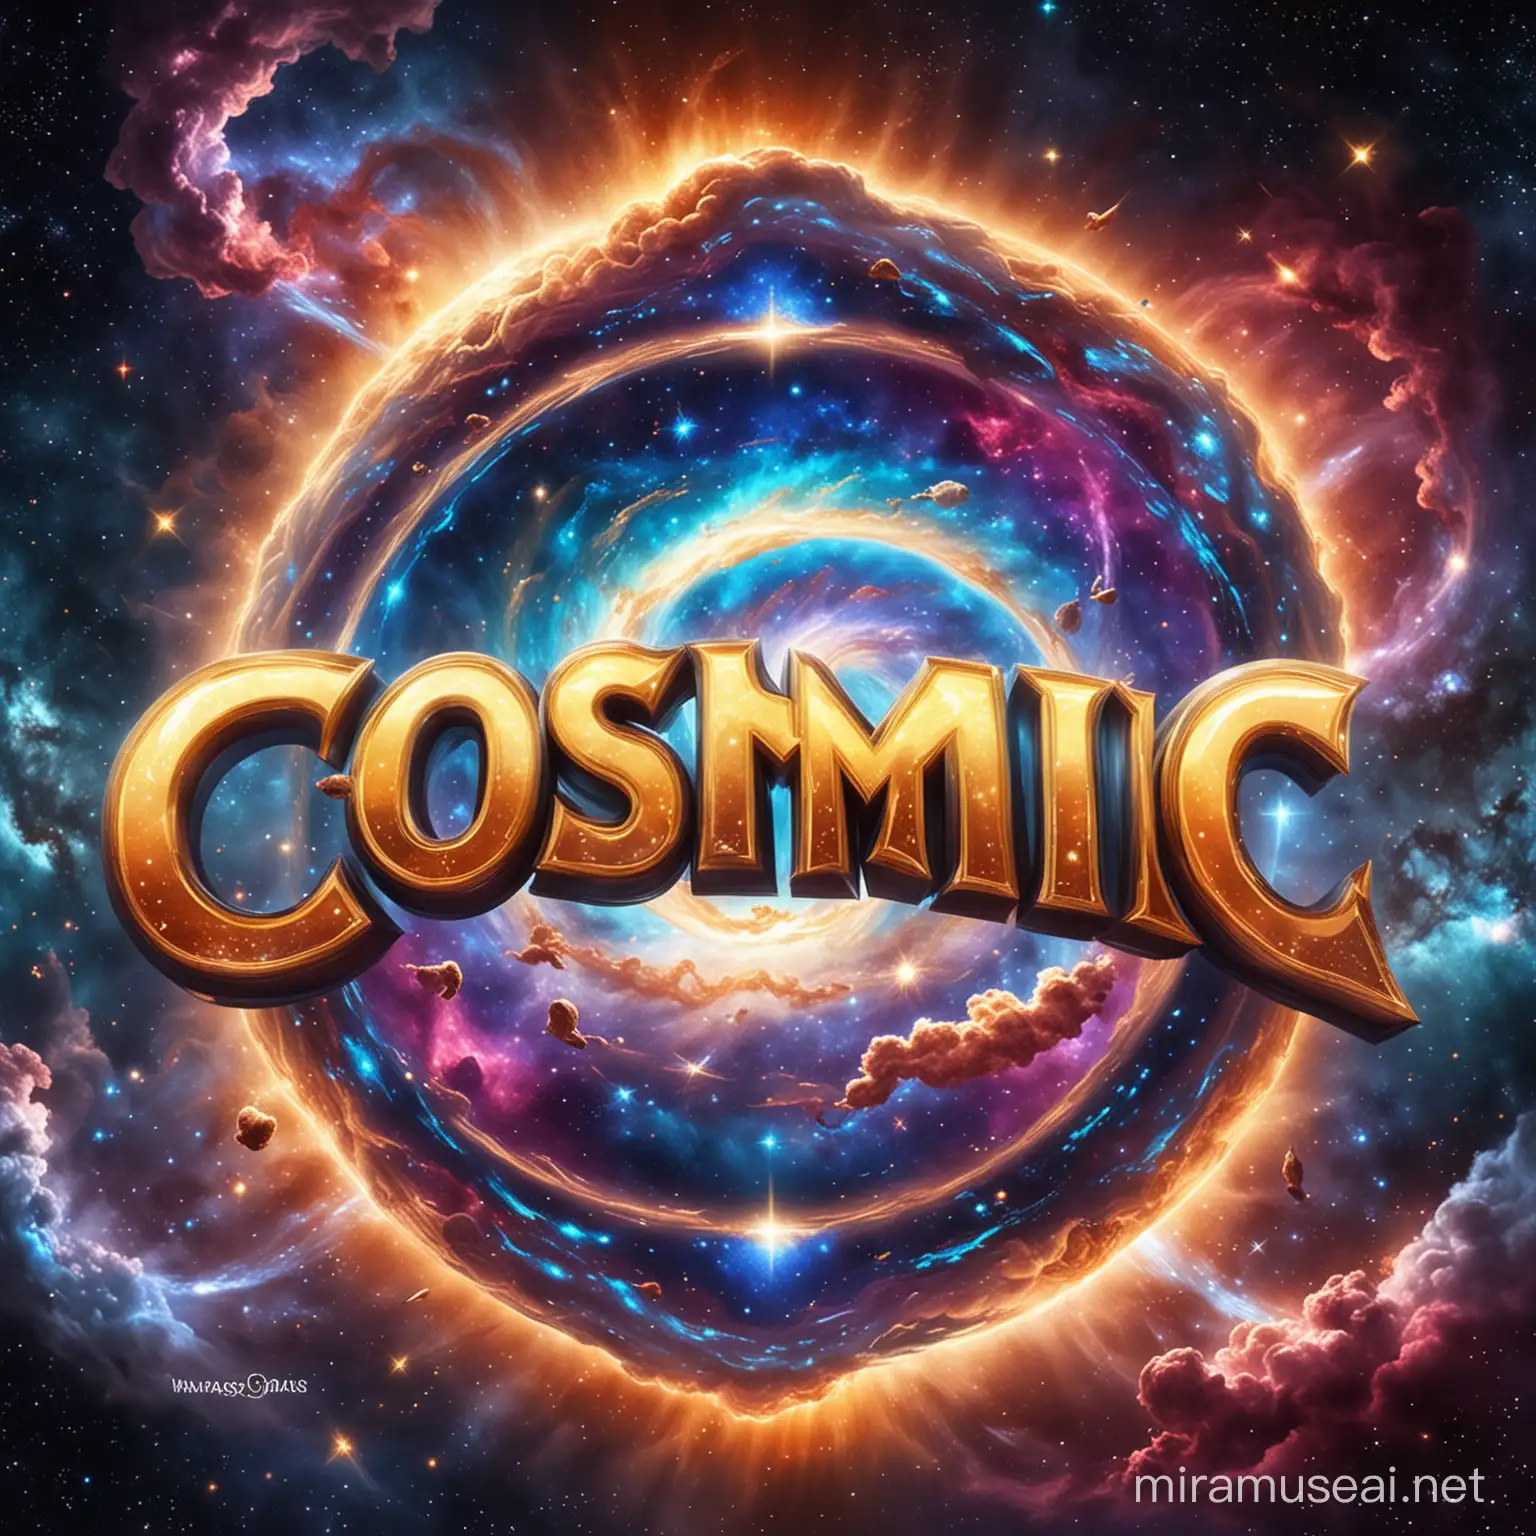 The word "Cosmic" is elegantly inscribed in swirling galaxies, set in the enchanting style of Sunfire Summit art. Surrounded by cosmic phenomena and backed by a distant supernova, this design exudes the essence of a game logo, ideal for a captivating mobile game background.